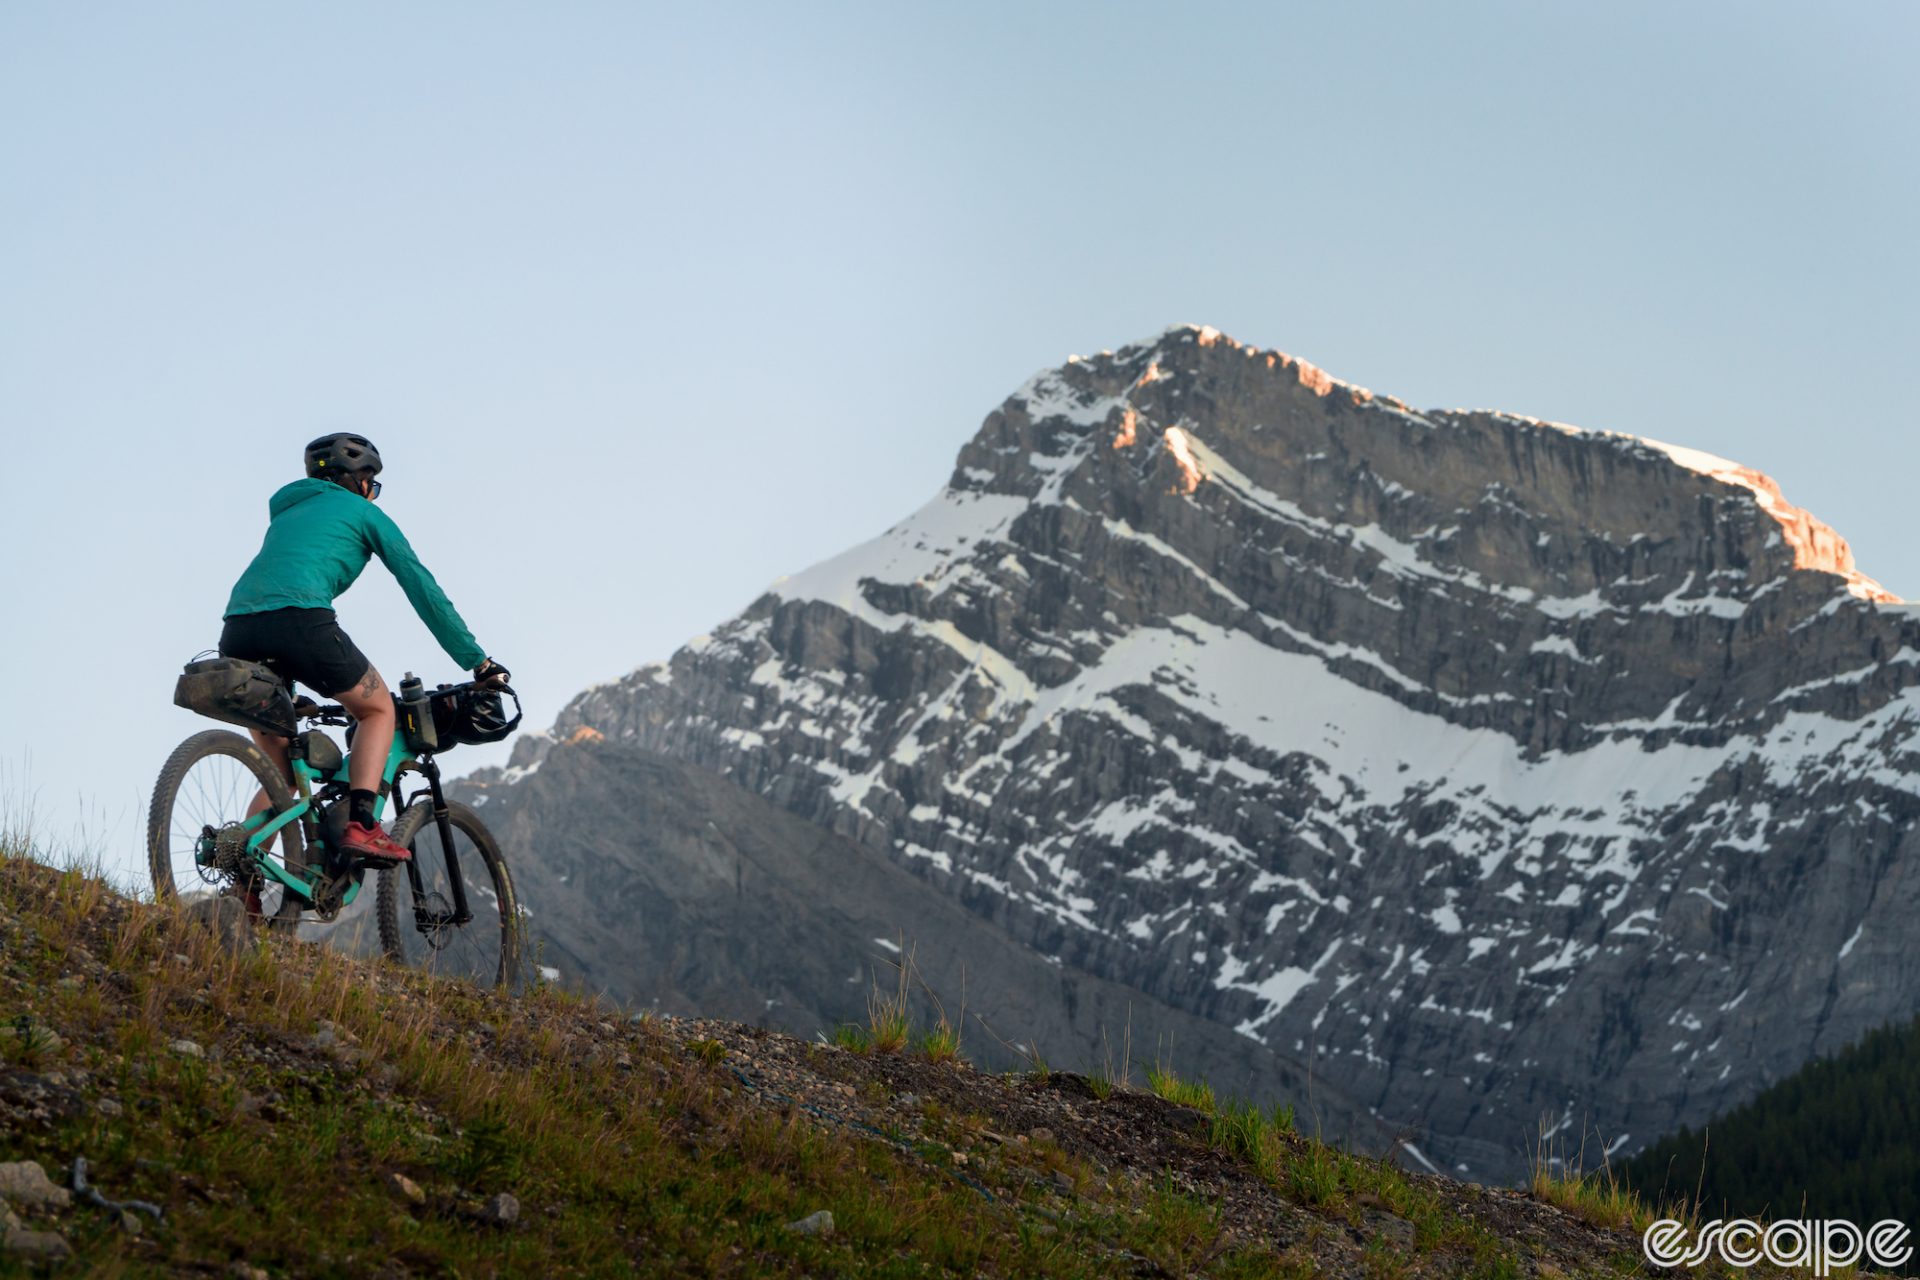 A bikepacker rides on a high alpine trail with a rugged, snow-capped peak in the distance.